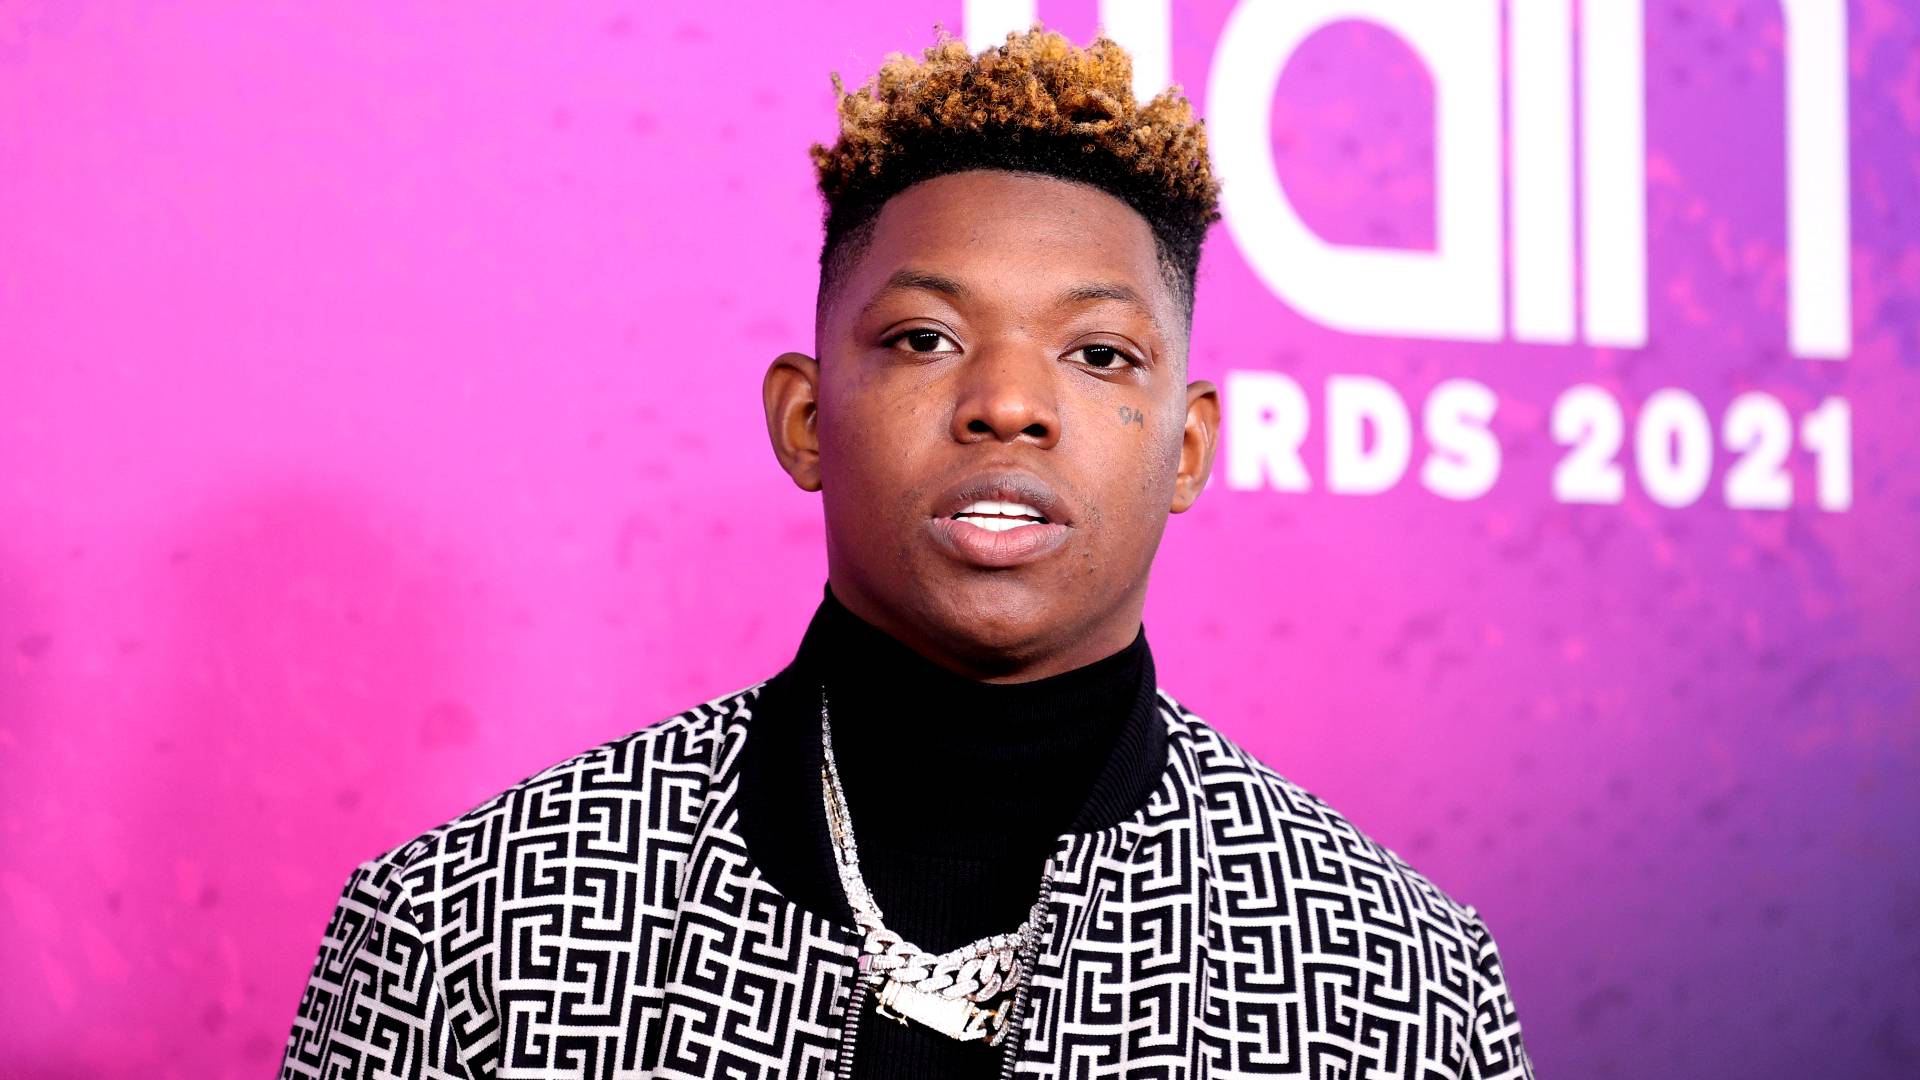 Yung Bleu attends The “2021 Soul Train Awards” Presented By BET at World Famous Apollo on November 20, 2021 in New York City. 
